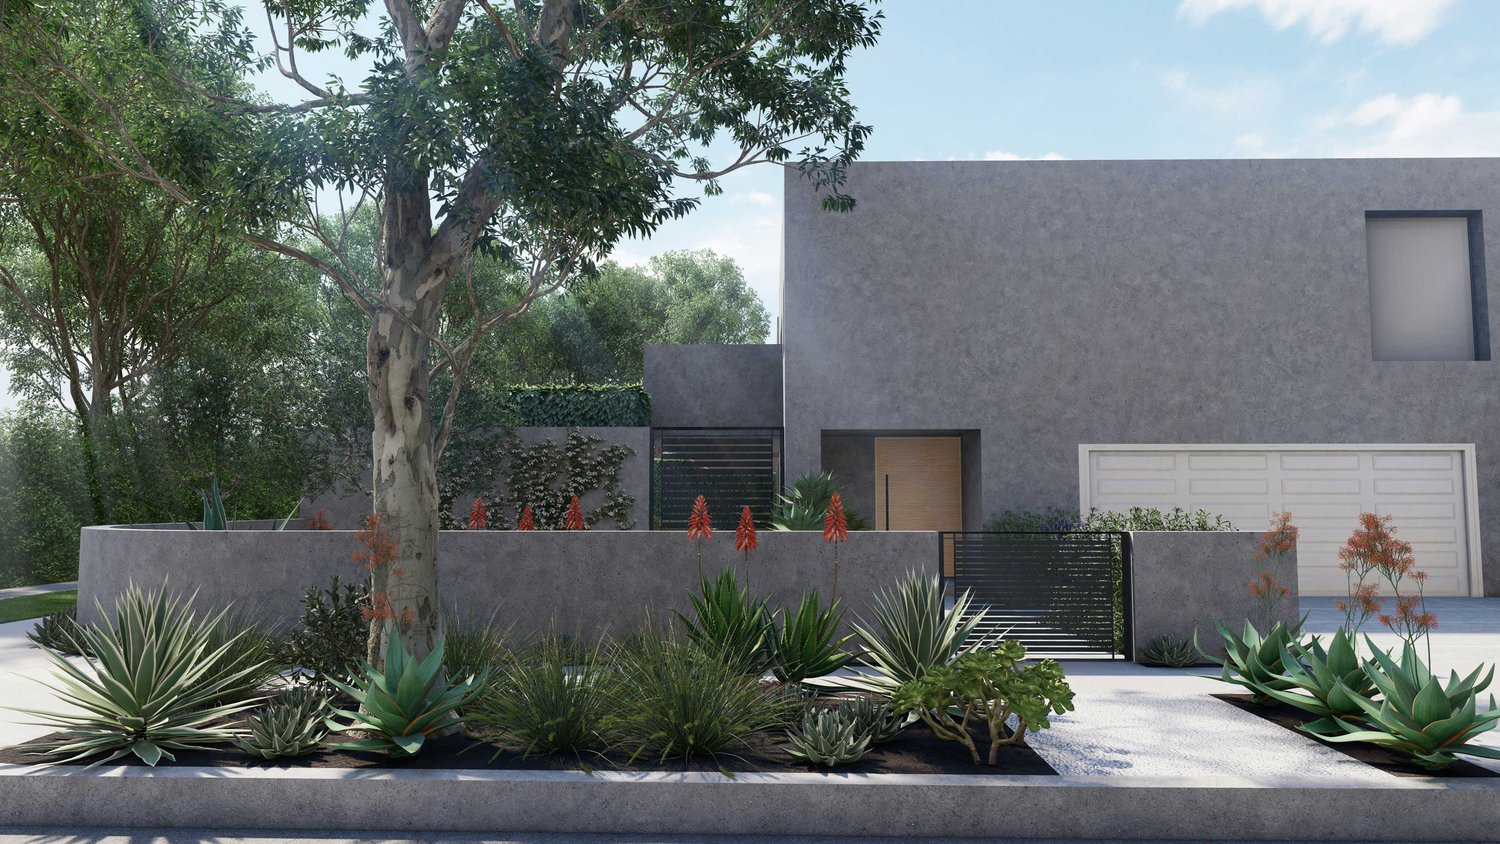 Los Angeles drought tolerant front yard with trees